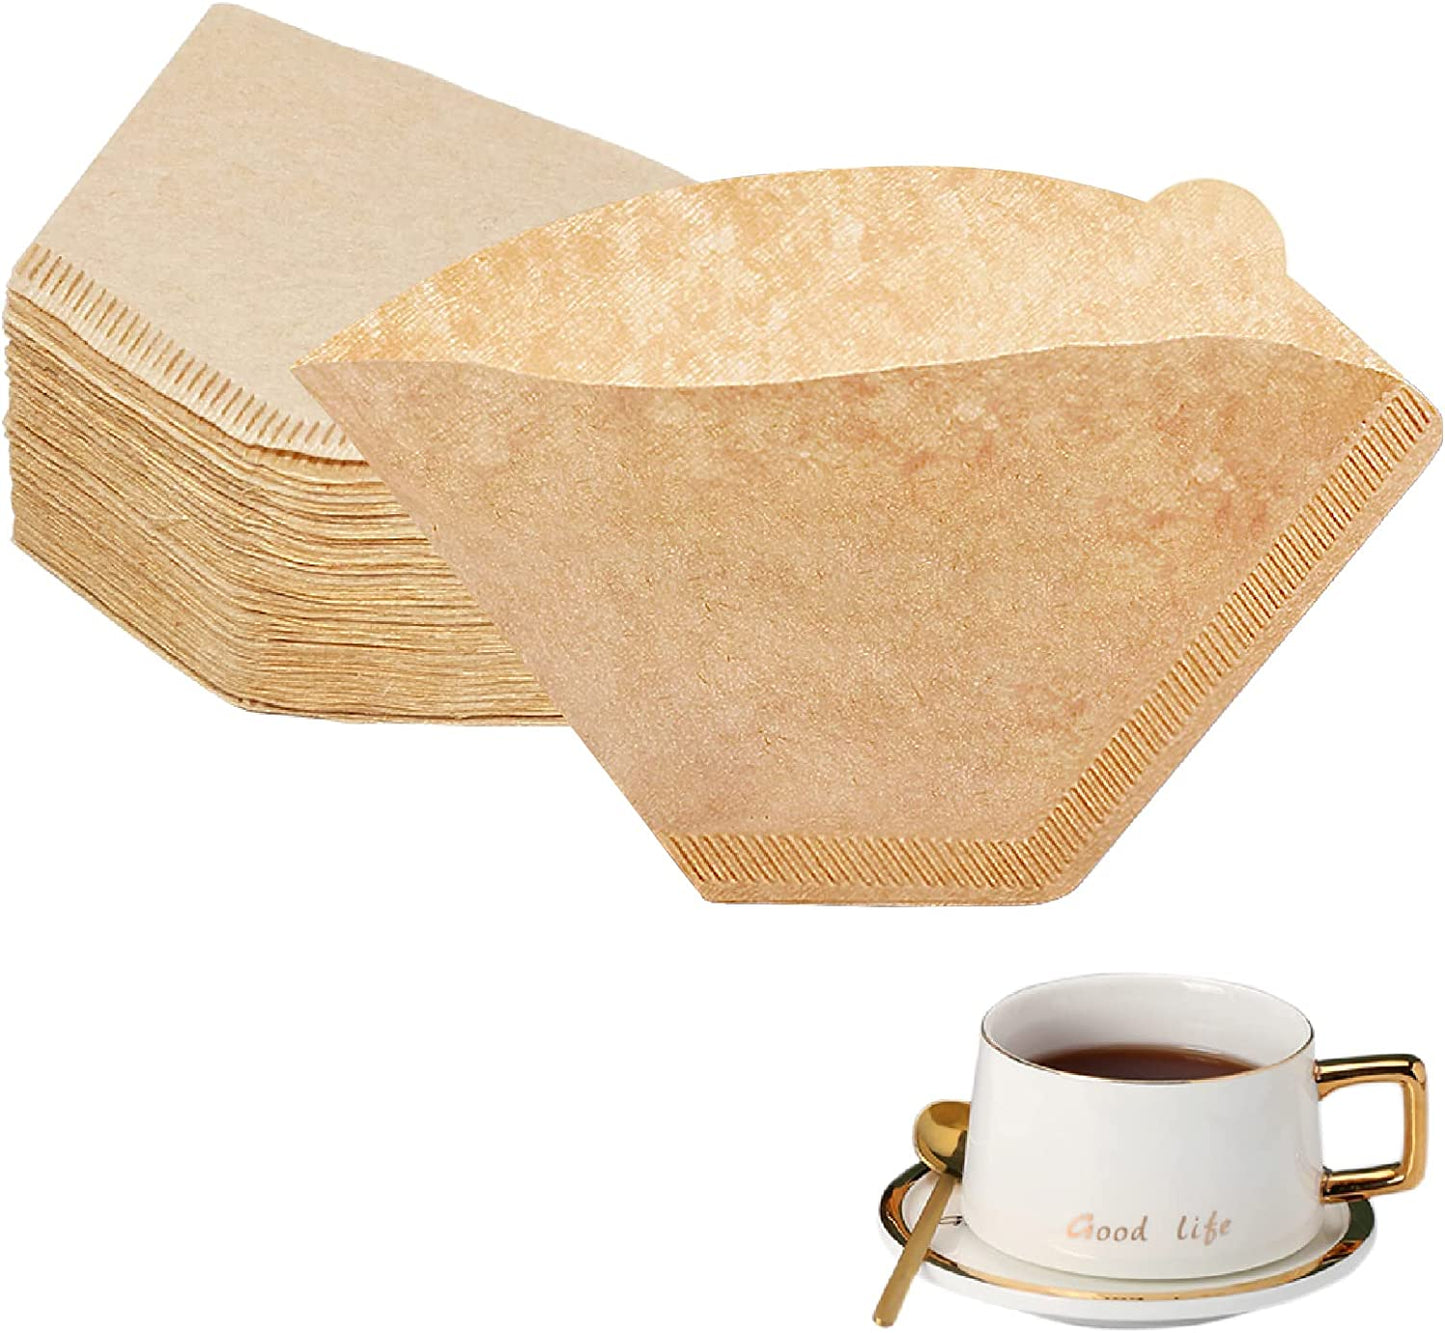 BYKITCHEN Size 4 Coffee Filters, 8-12 Cup, Set of 200, Coffee Filters 4 Cone Paper, Natural Unbleached Paper Filters for Pour over Coffee Dripper and Coffee Maker